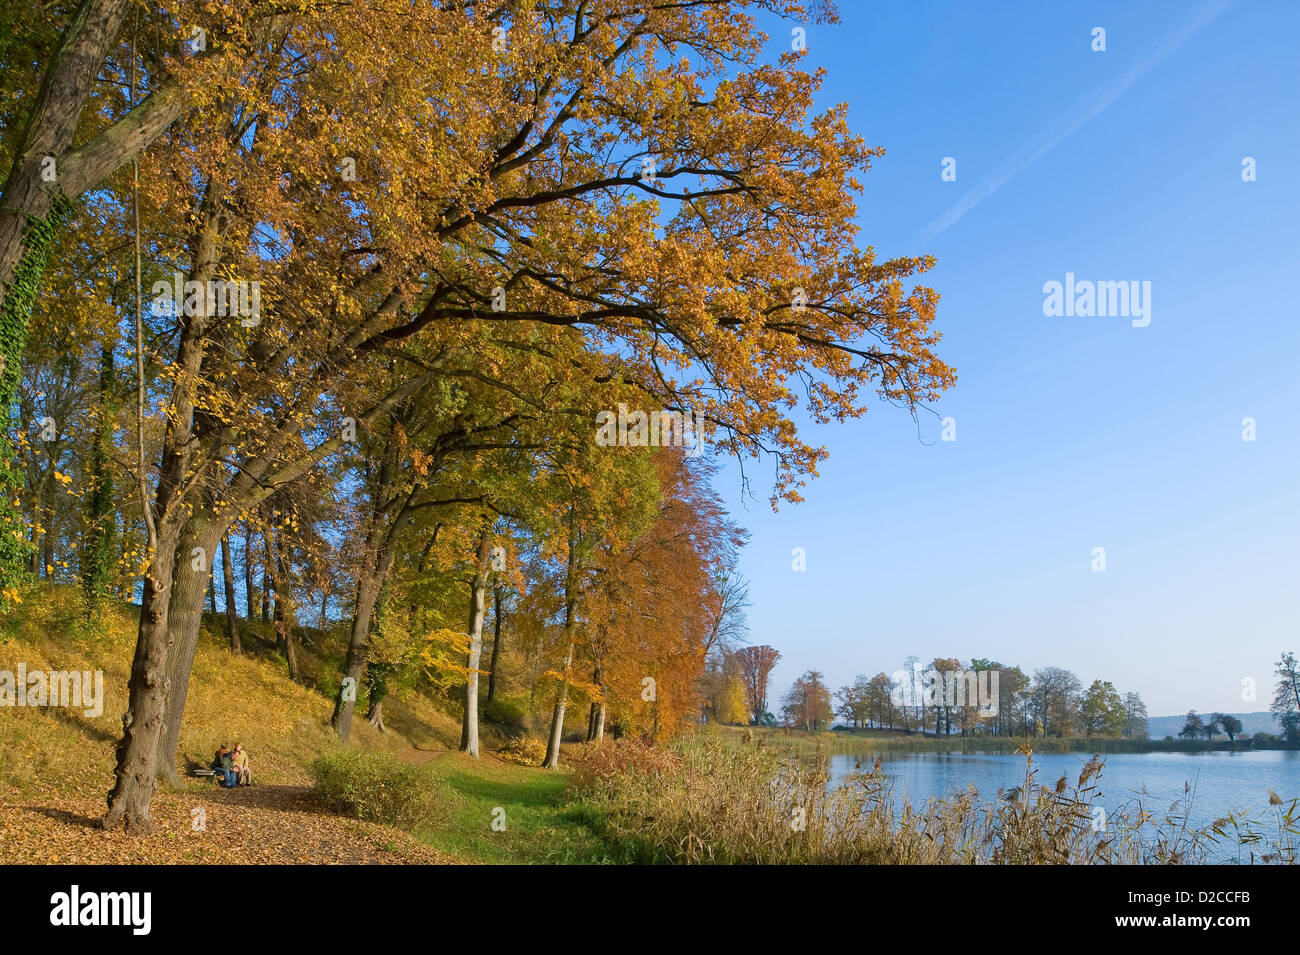 Werder, Germany, autumn mood in the park Petzow Stock Photo